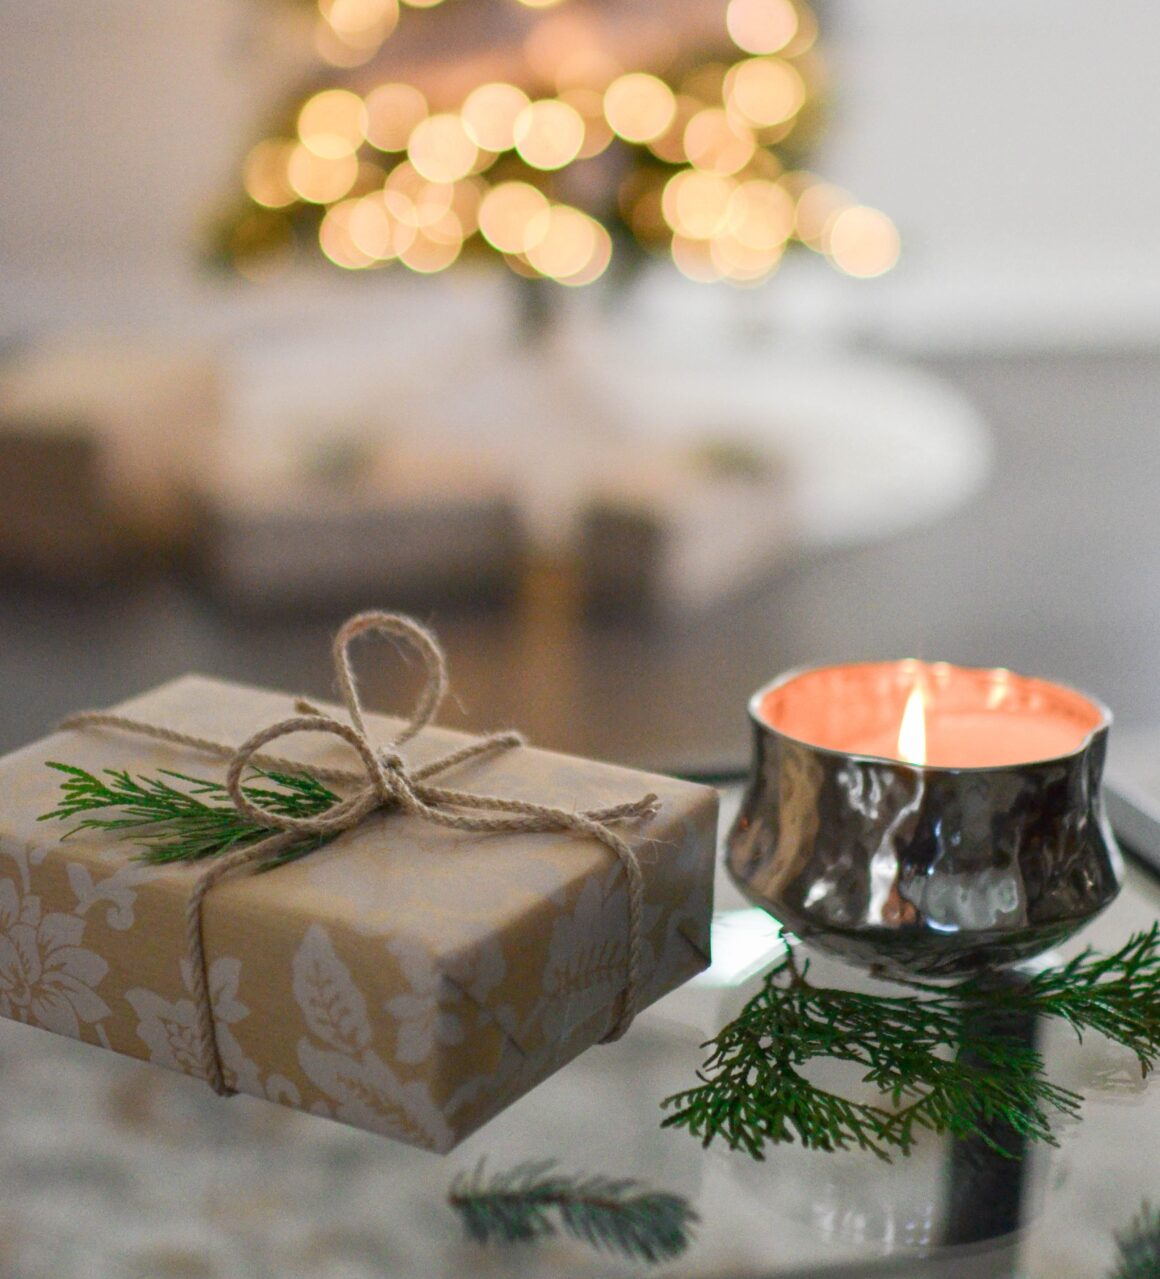 A gift box and candle. Wishing you happy holidays from Urban Oasis Day Spa!